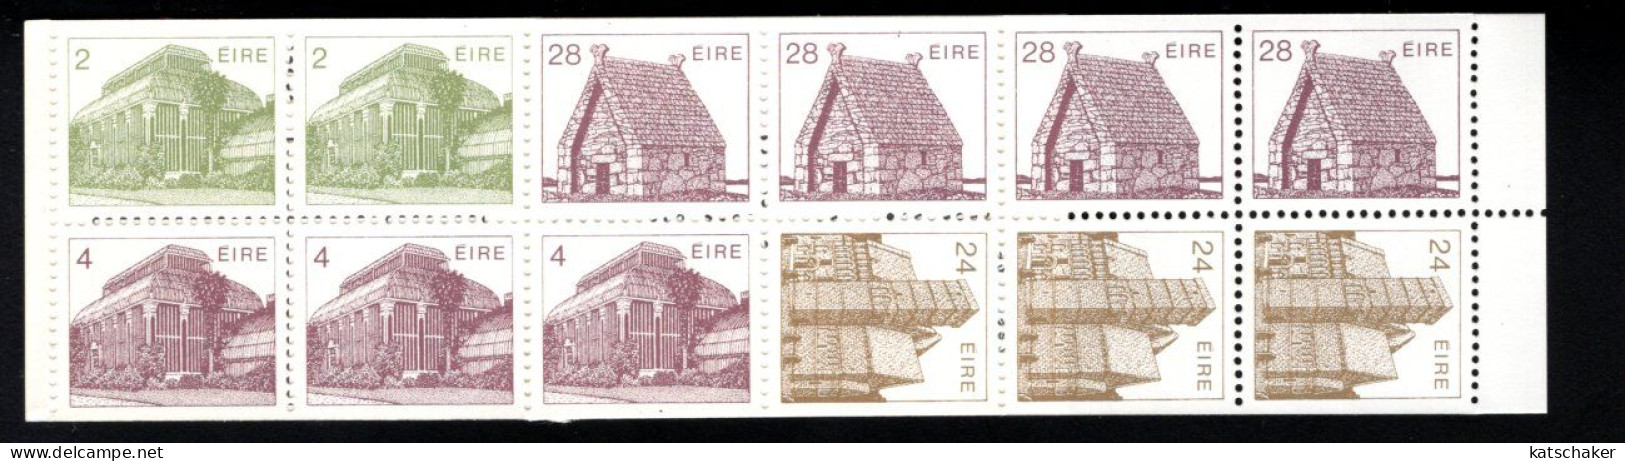 1998804200 1988  SCOTT 639C (XX) POSTFRIS  MINT NEVER HINGED - BOOKLET PANE ARCHITECTURE TYPE OF 1982 - Unused Stamps